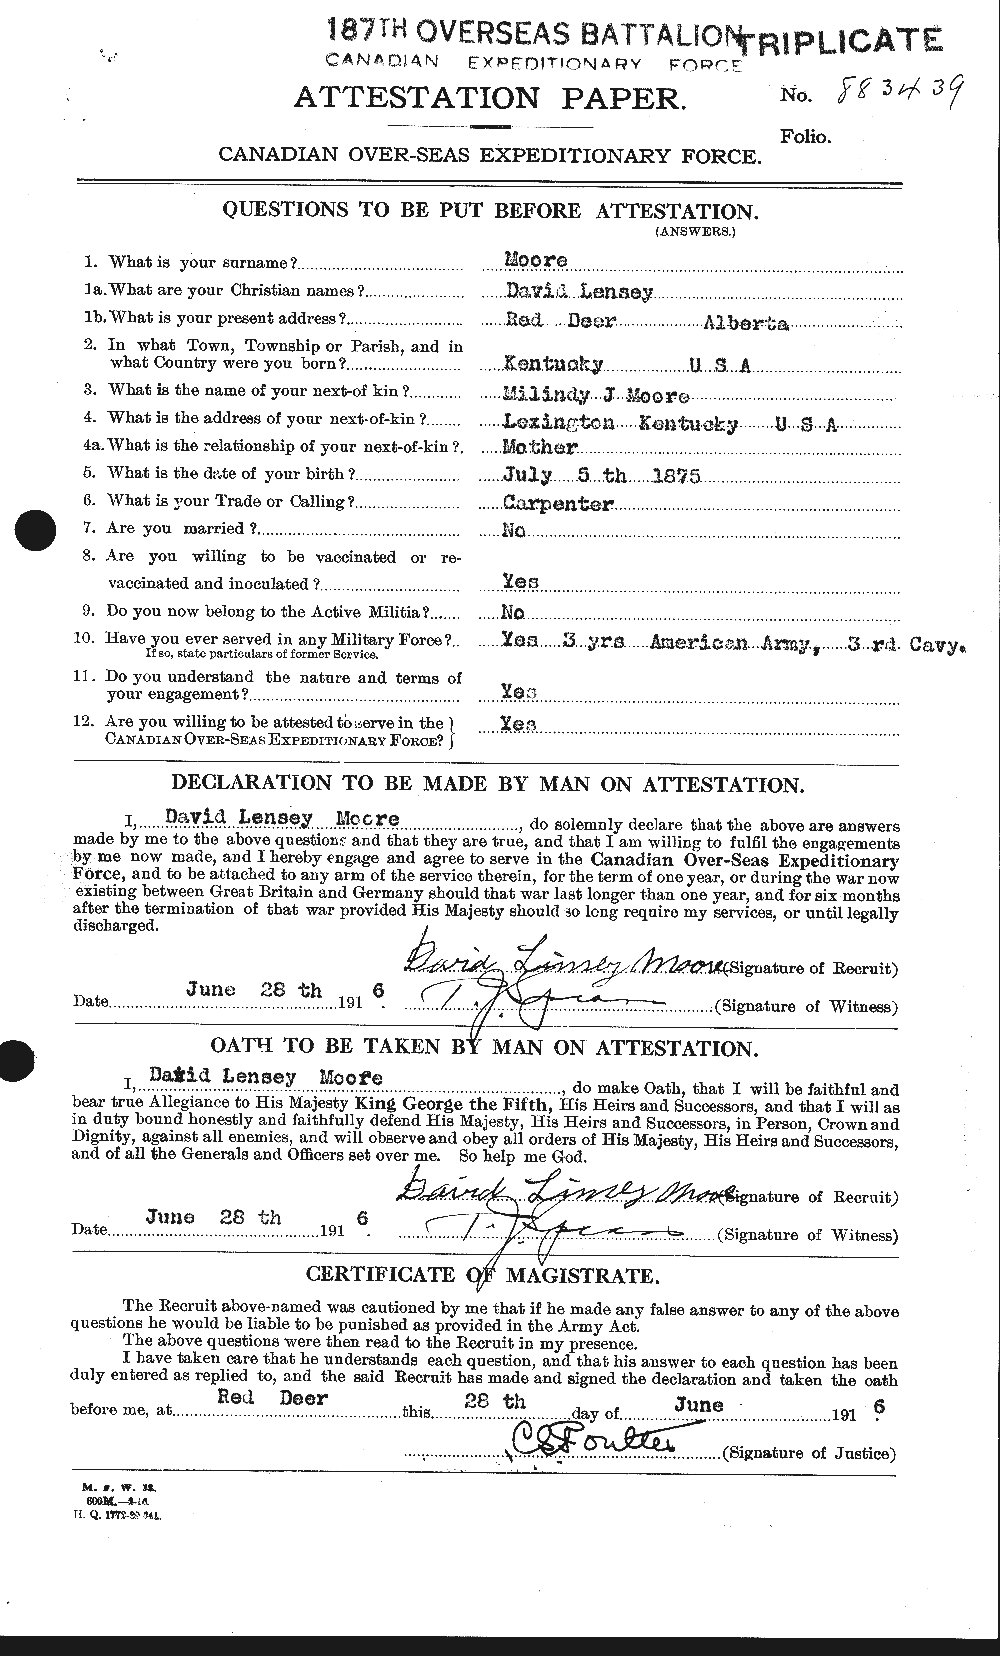 Personnel Records of the First World War - CEF 506574a